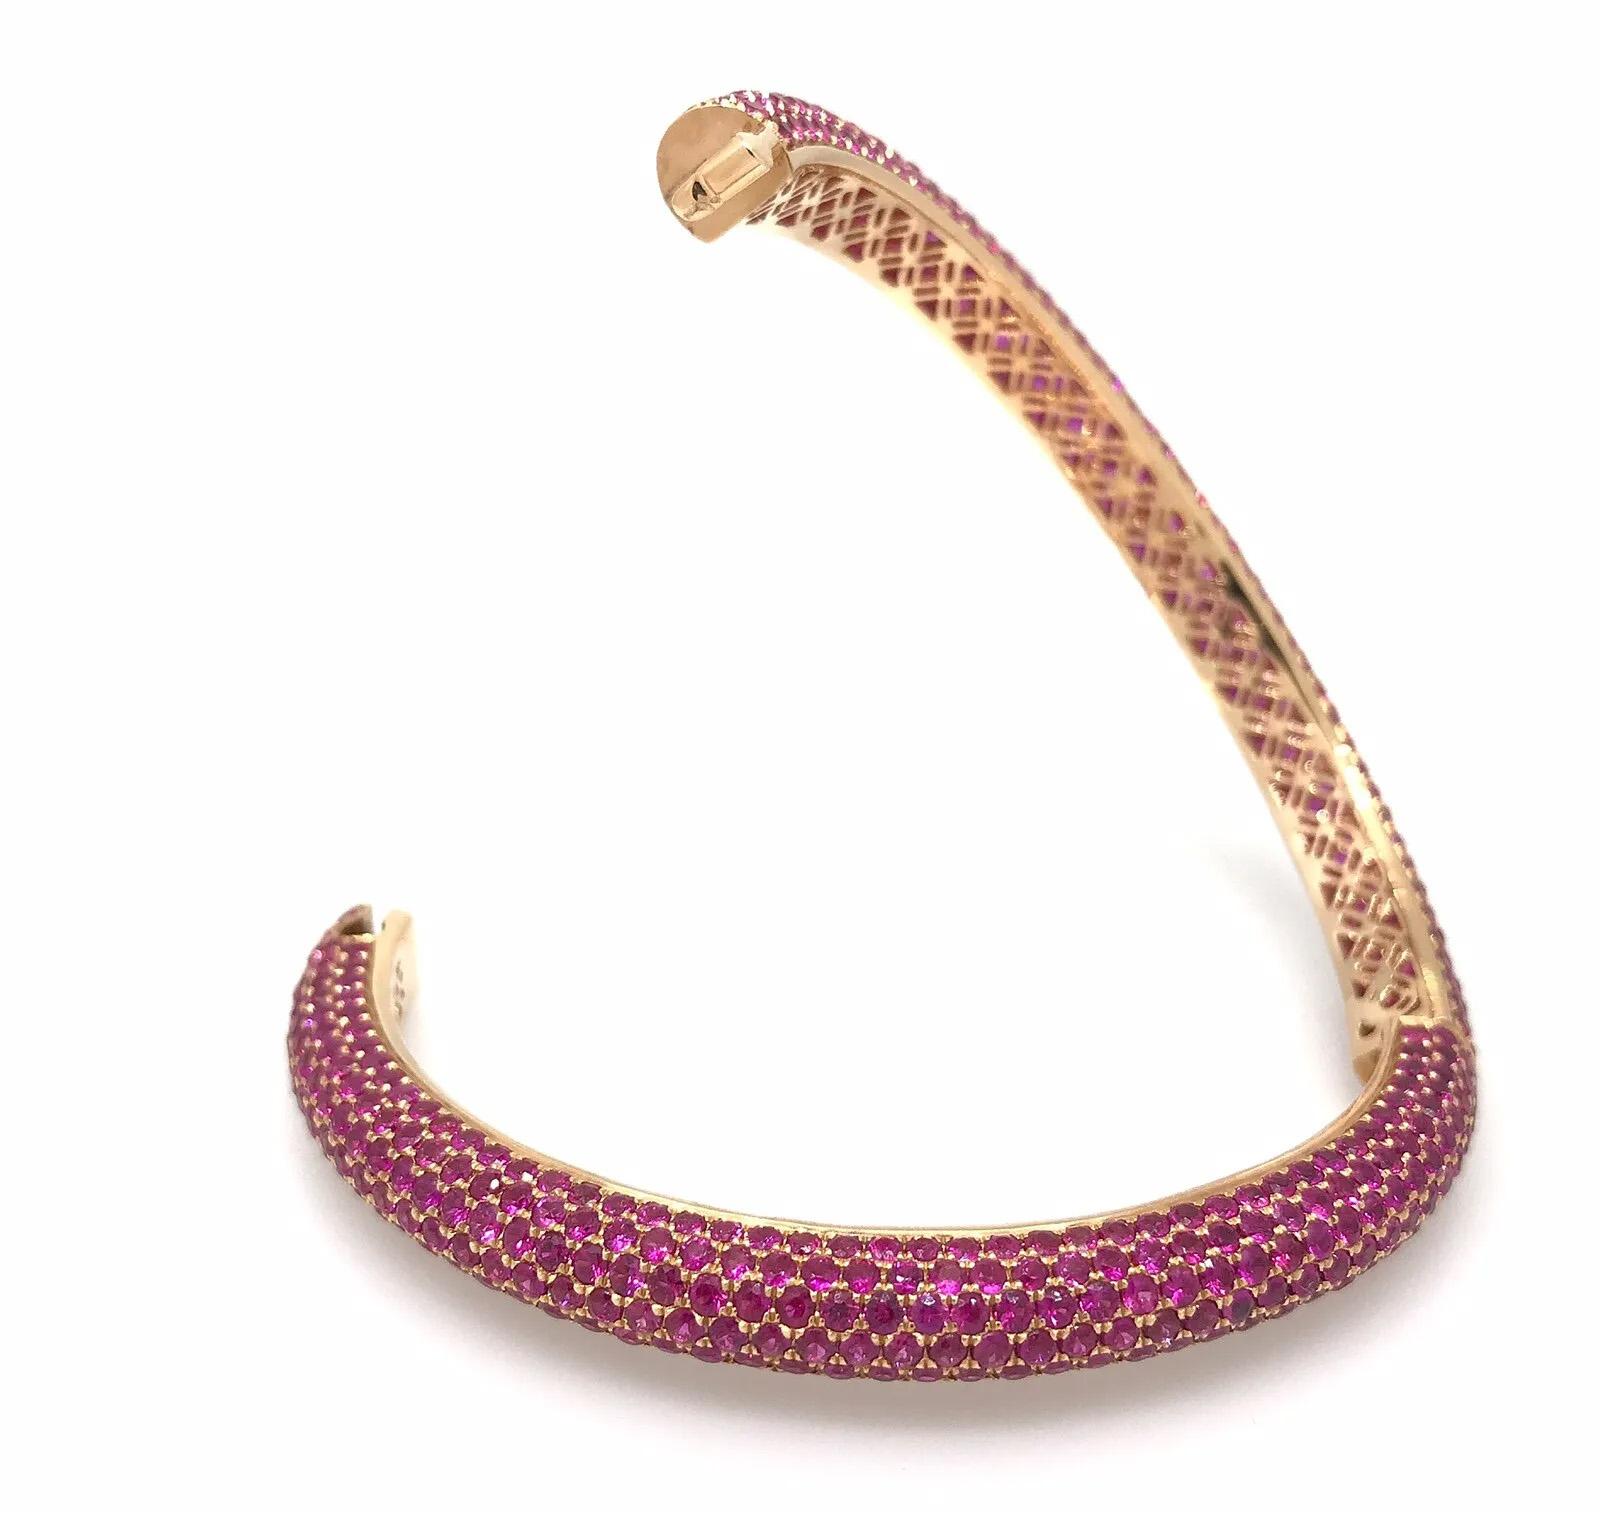 19.22 Carats Ruby Pave Bangle Bracelet in 18k Rose Gold In Excellent Condition For Sale In La Jolla, CA